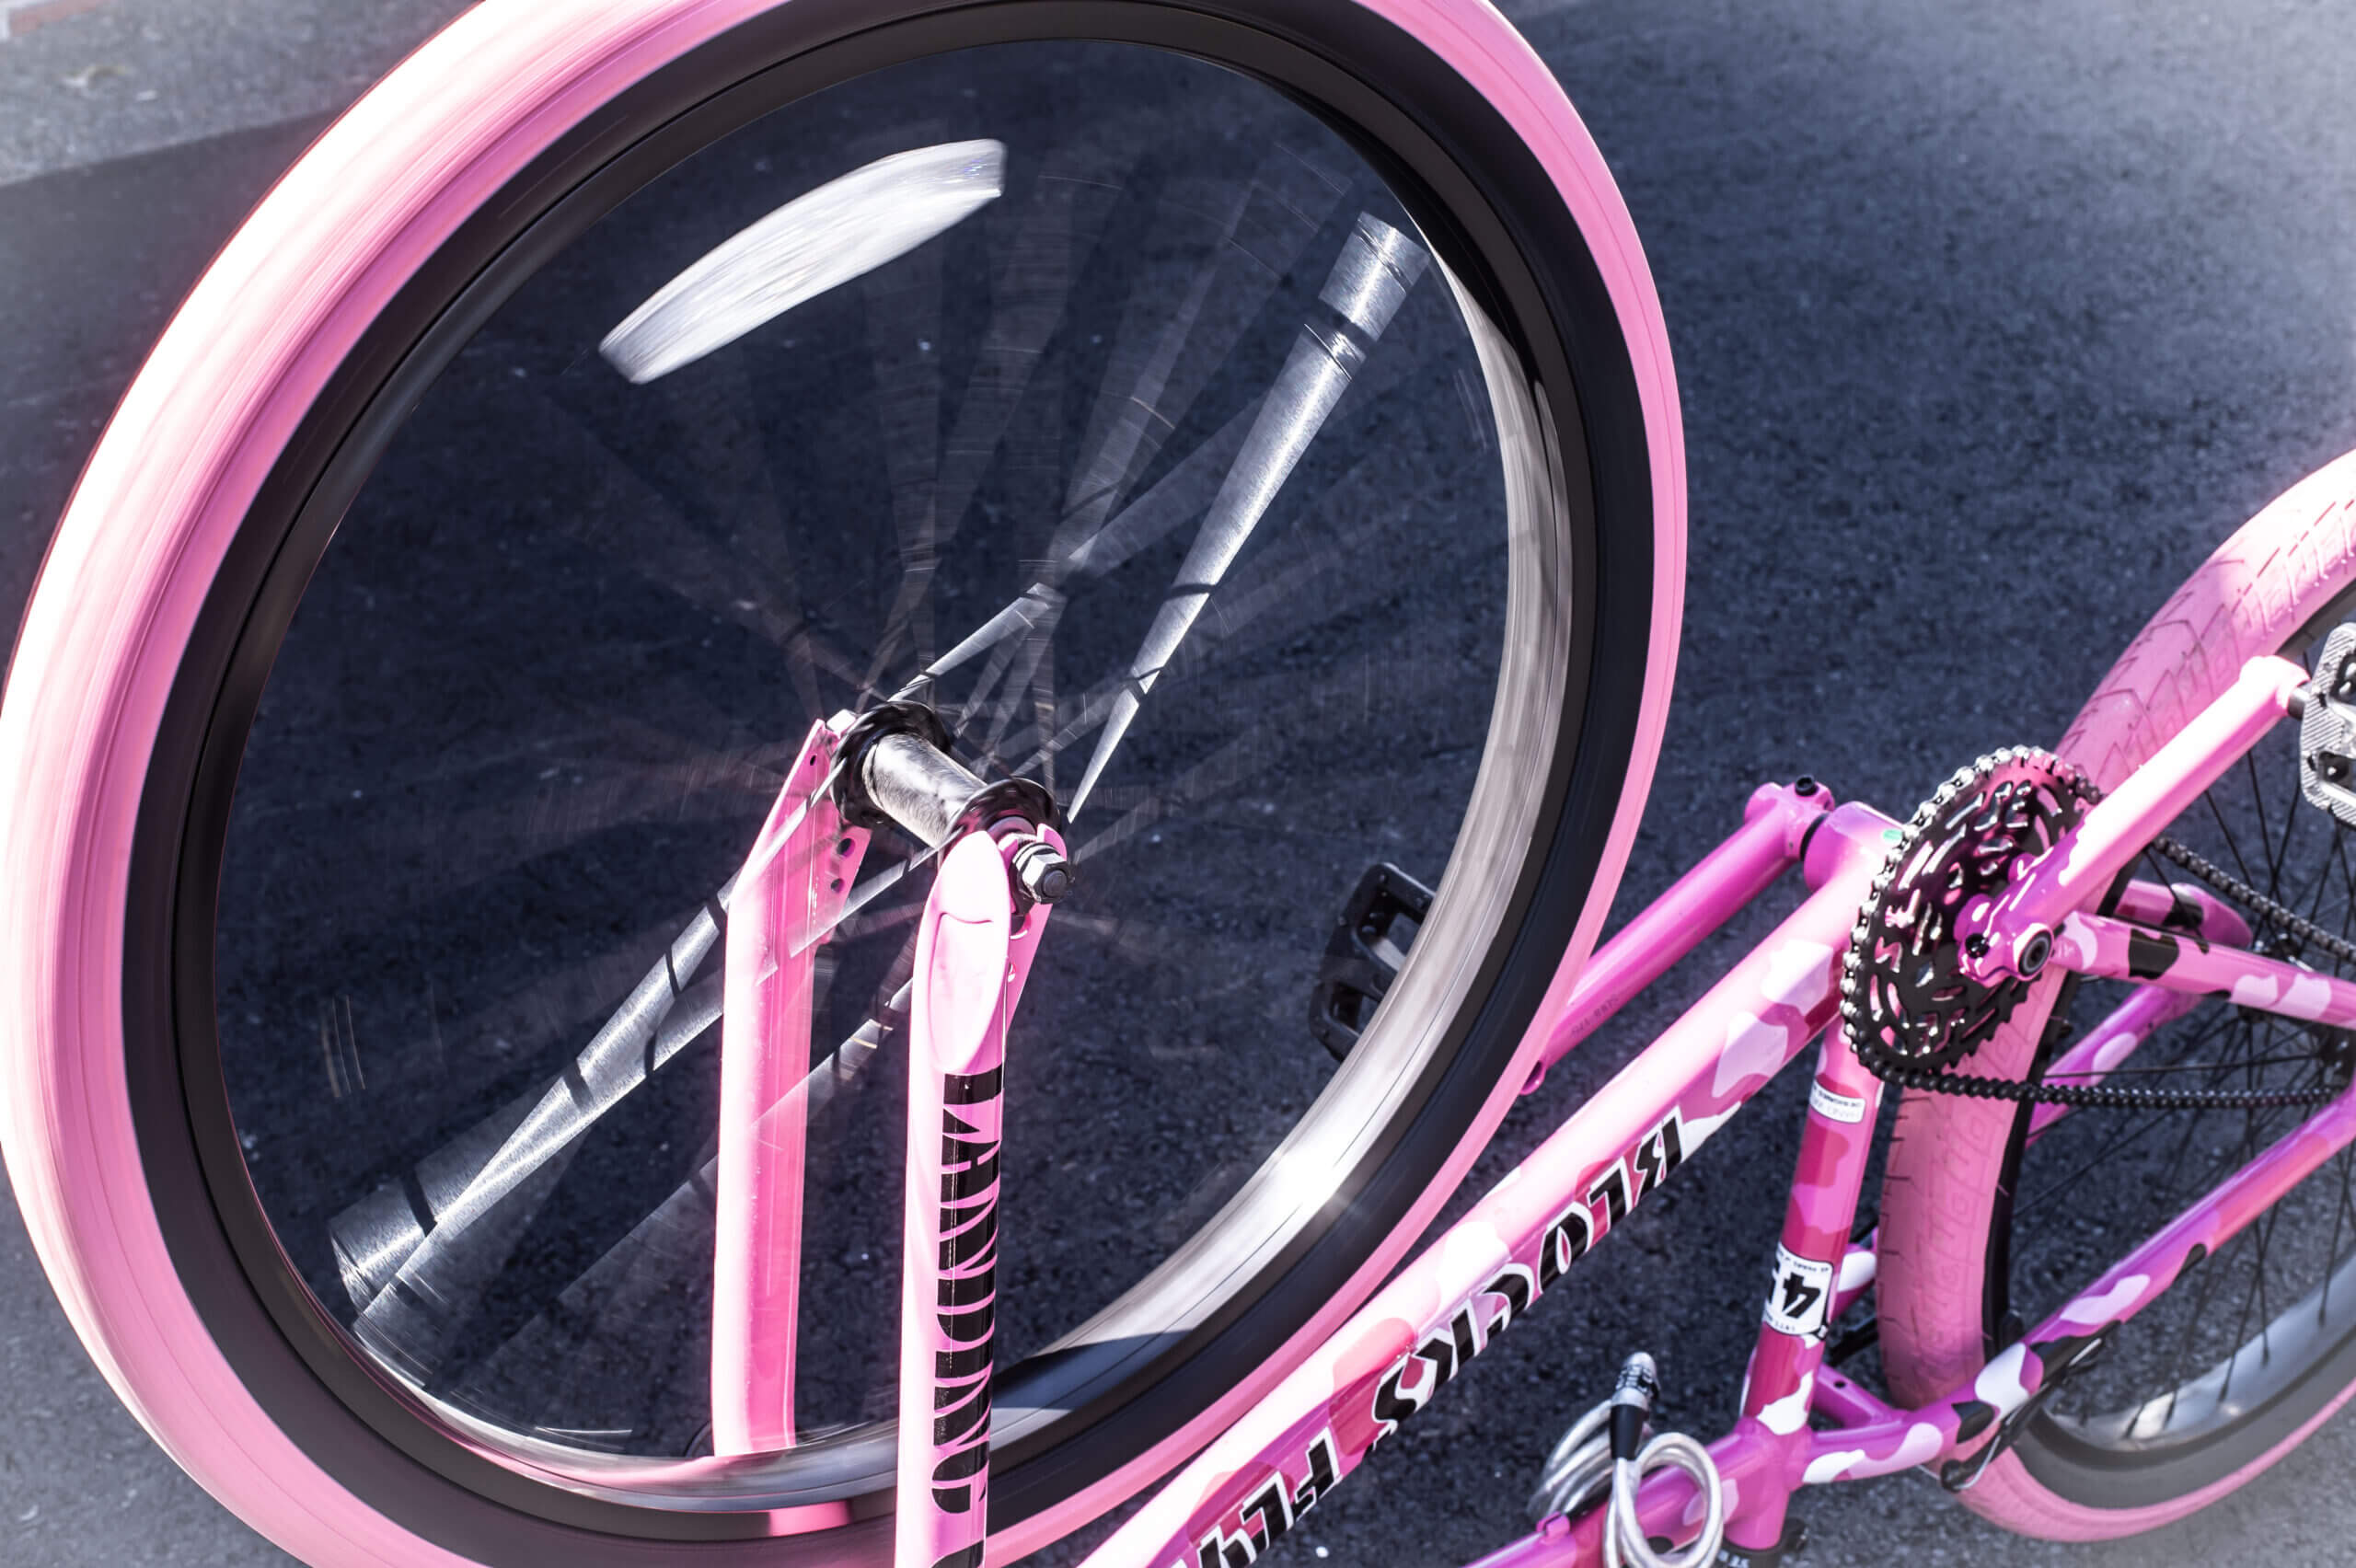 Color image of a pink bike upside-down on black pavement. The front wheel is in motion.